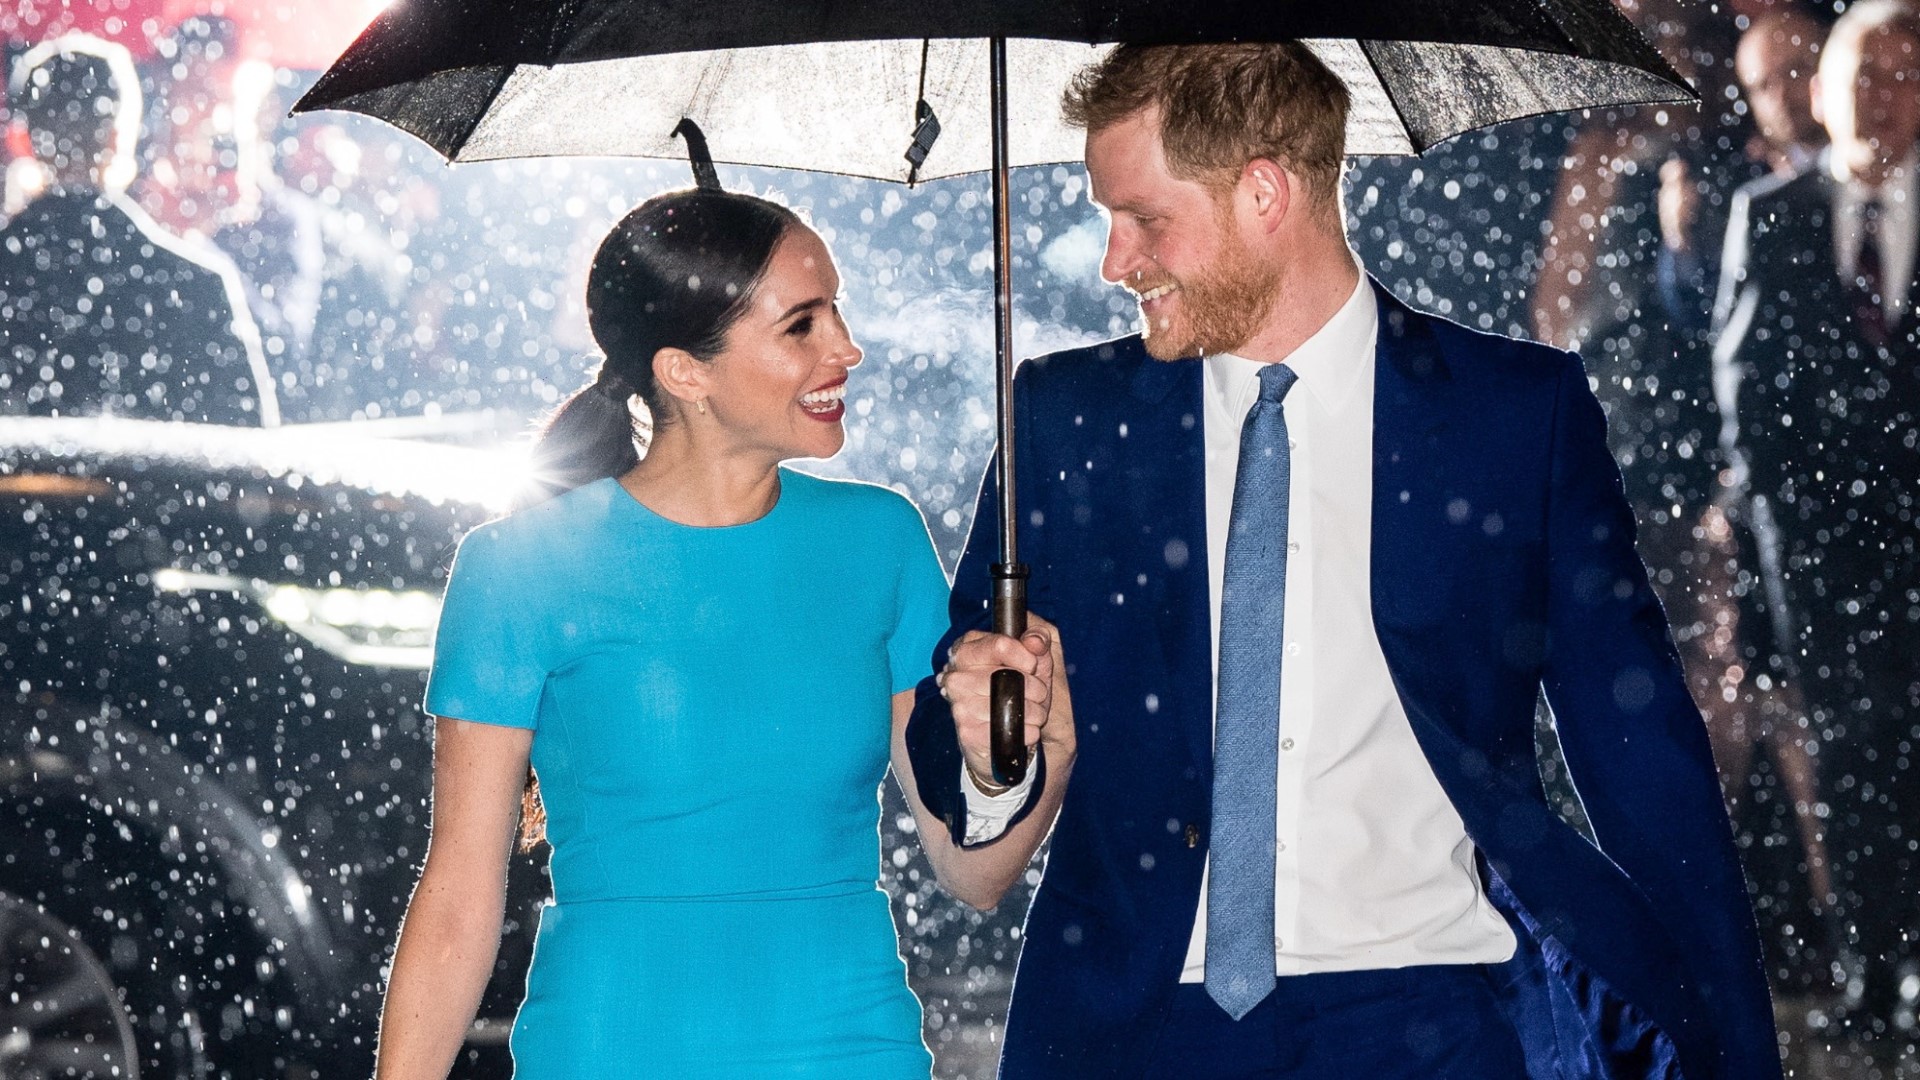 Since stepping back from the royal family last year, Prince Harry and Meghan Markle have been very vocal about topics they care about, but since they will always be tied to the royal family there are certain lines they can't cross. Buzz60's Johana Restrepo has more.